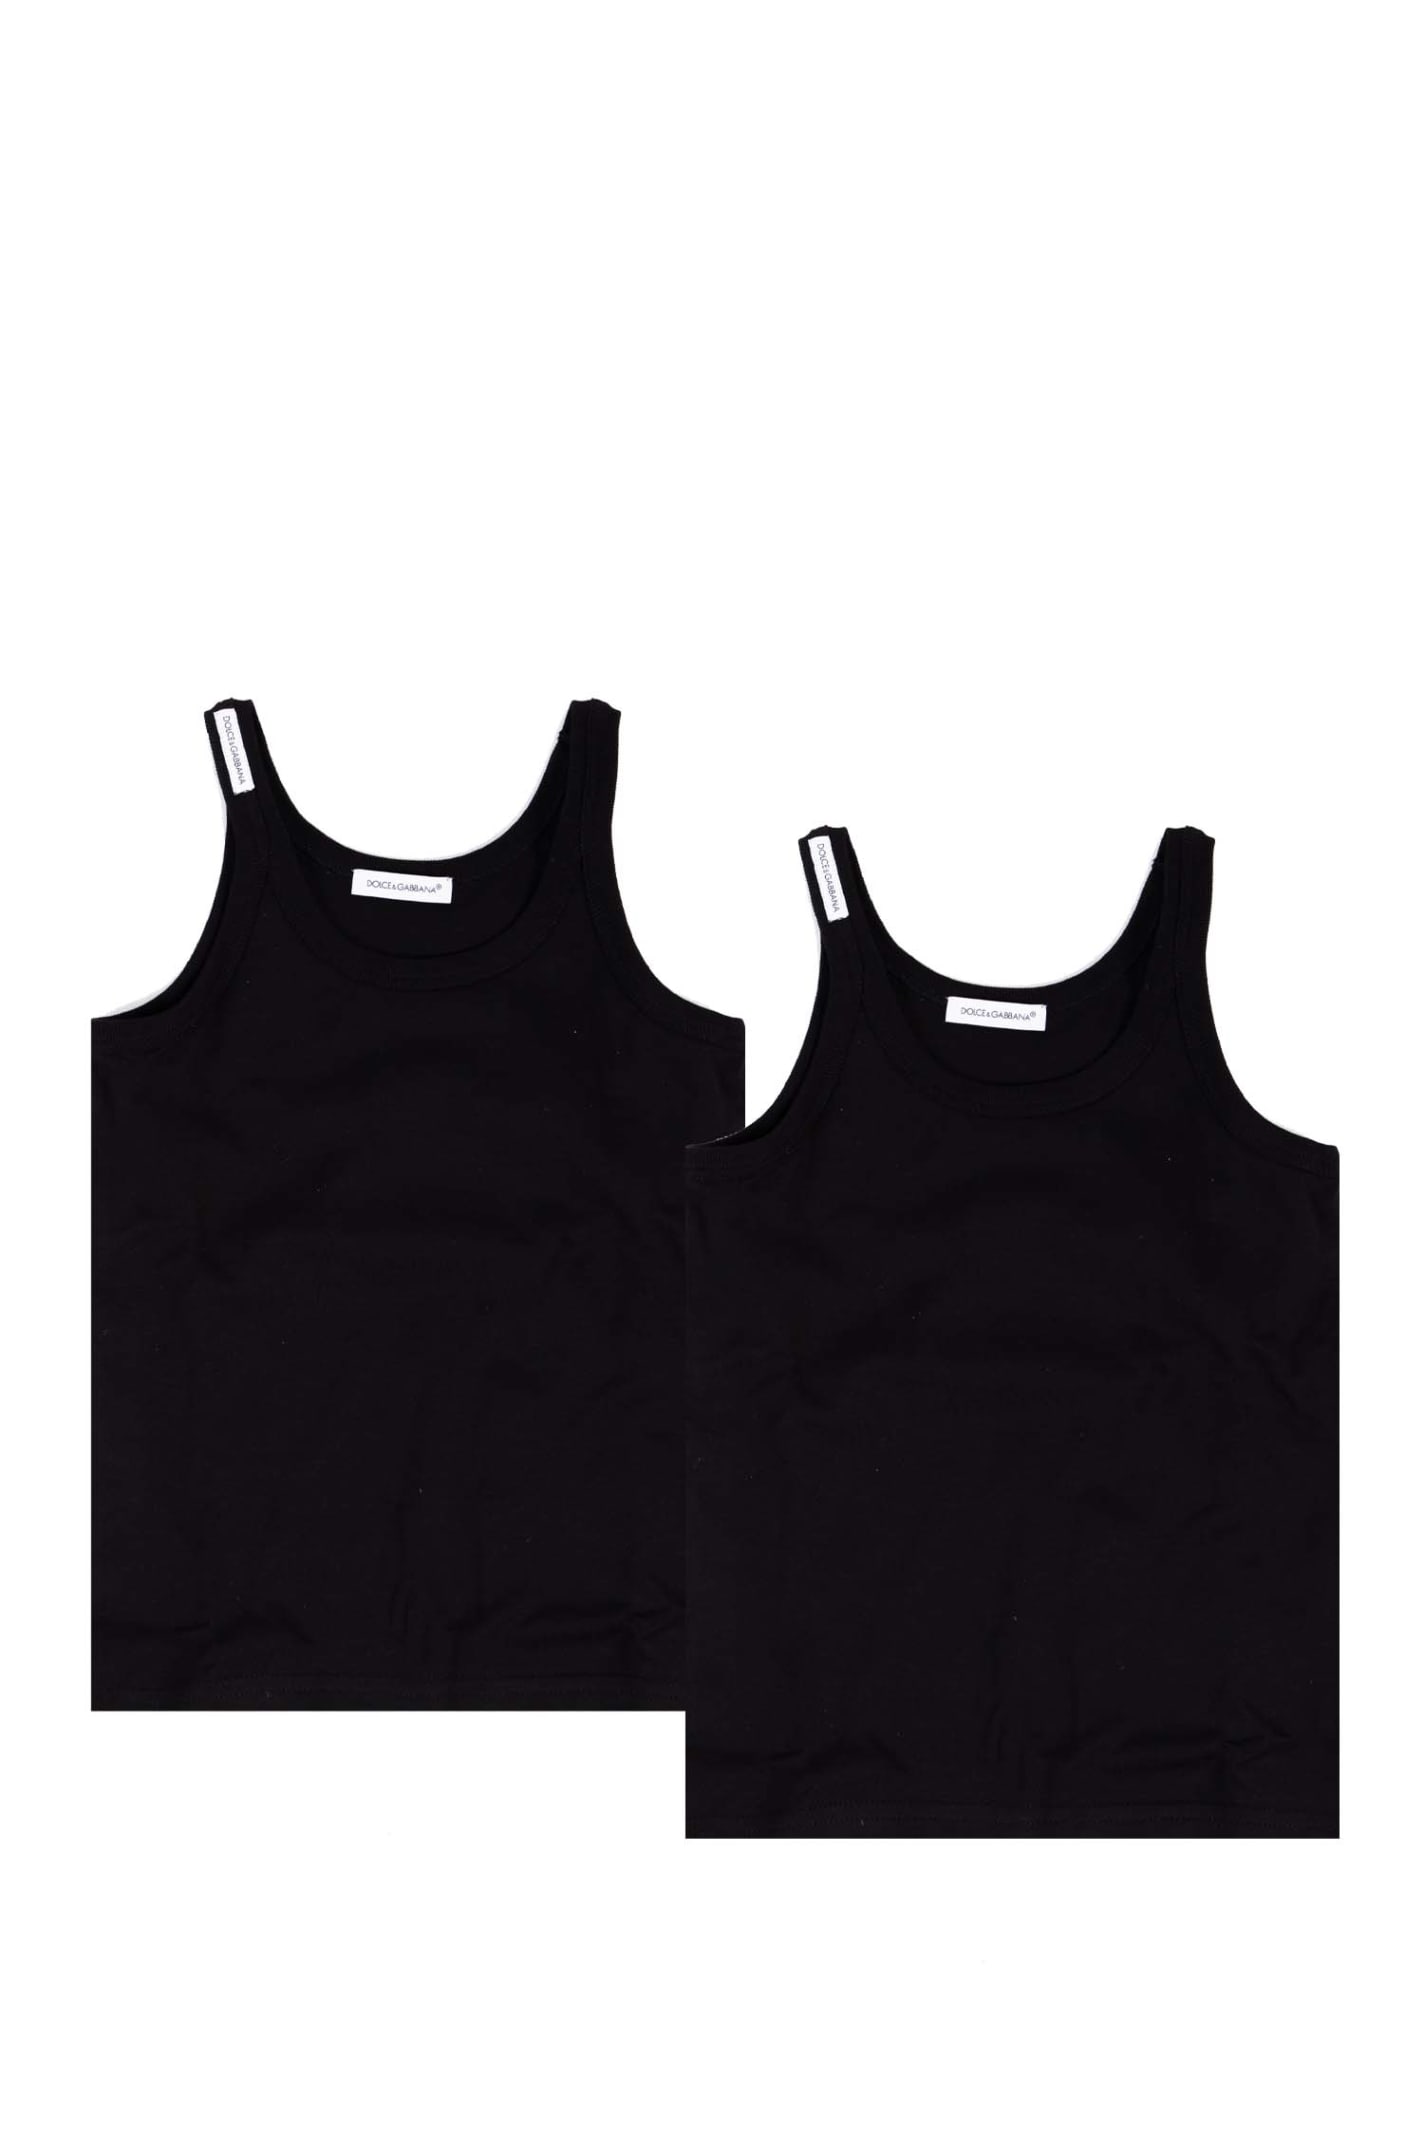 DOLCE & GABBANA PACK OF 2 STRETCH JERSEY TANKS TOP